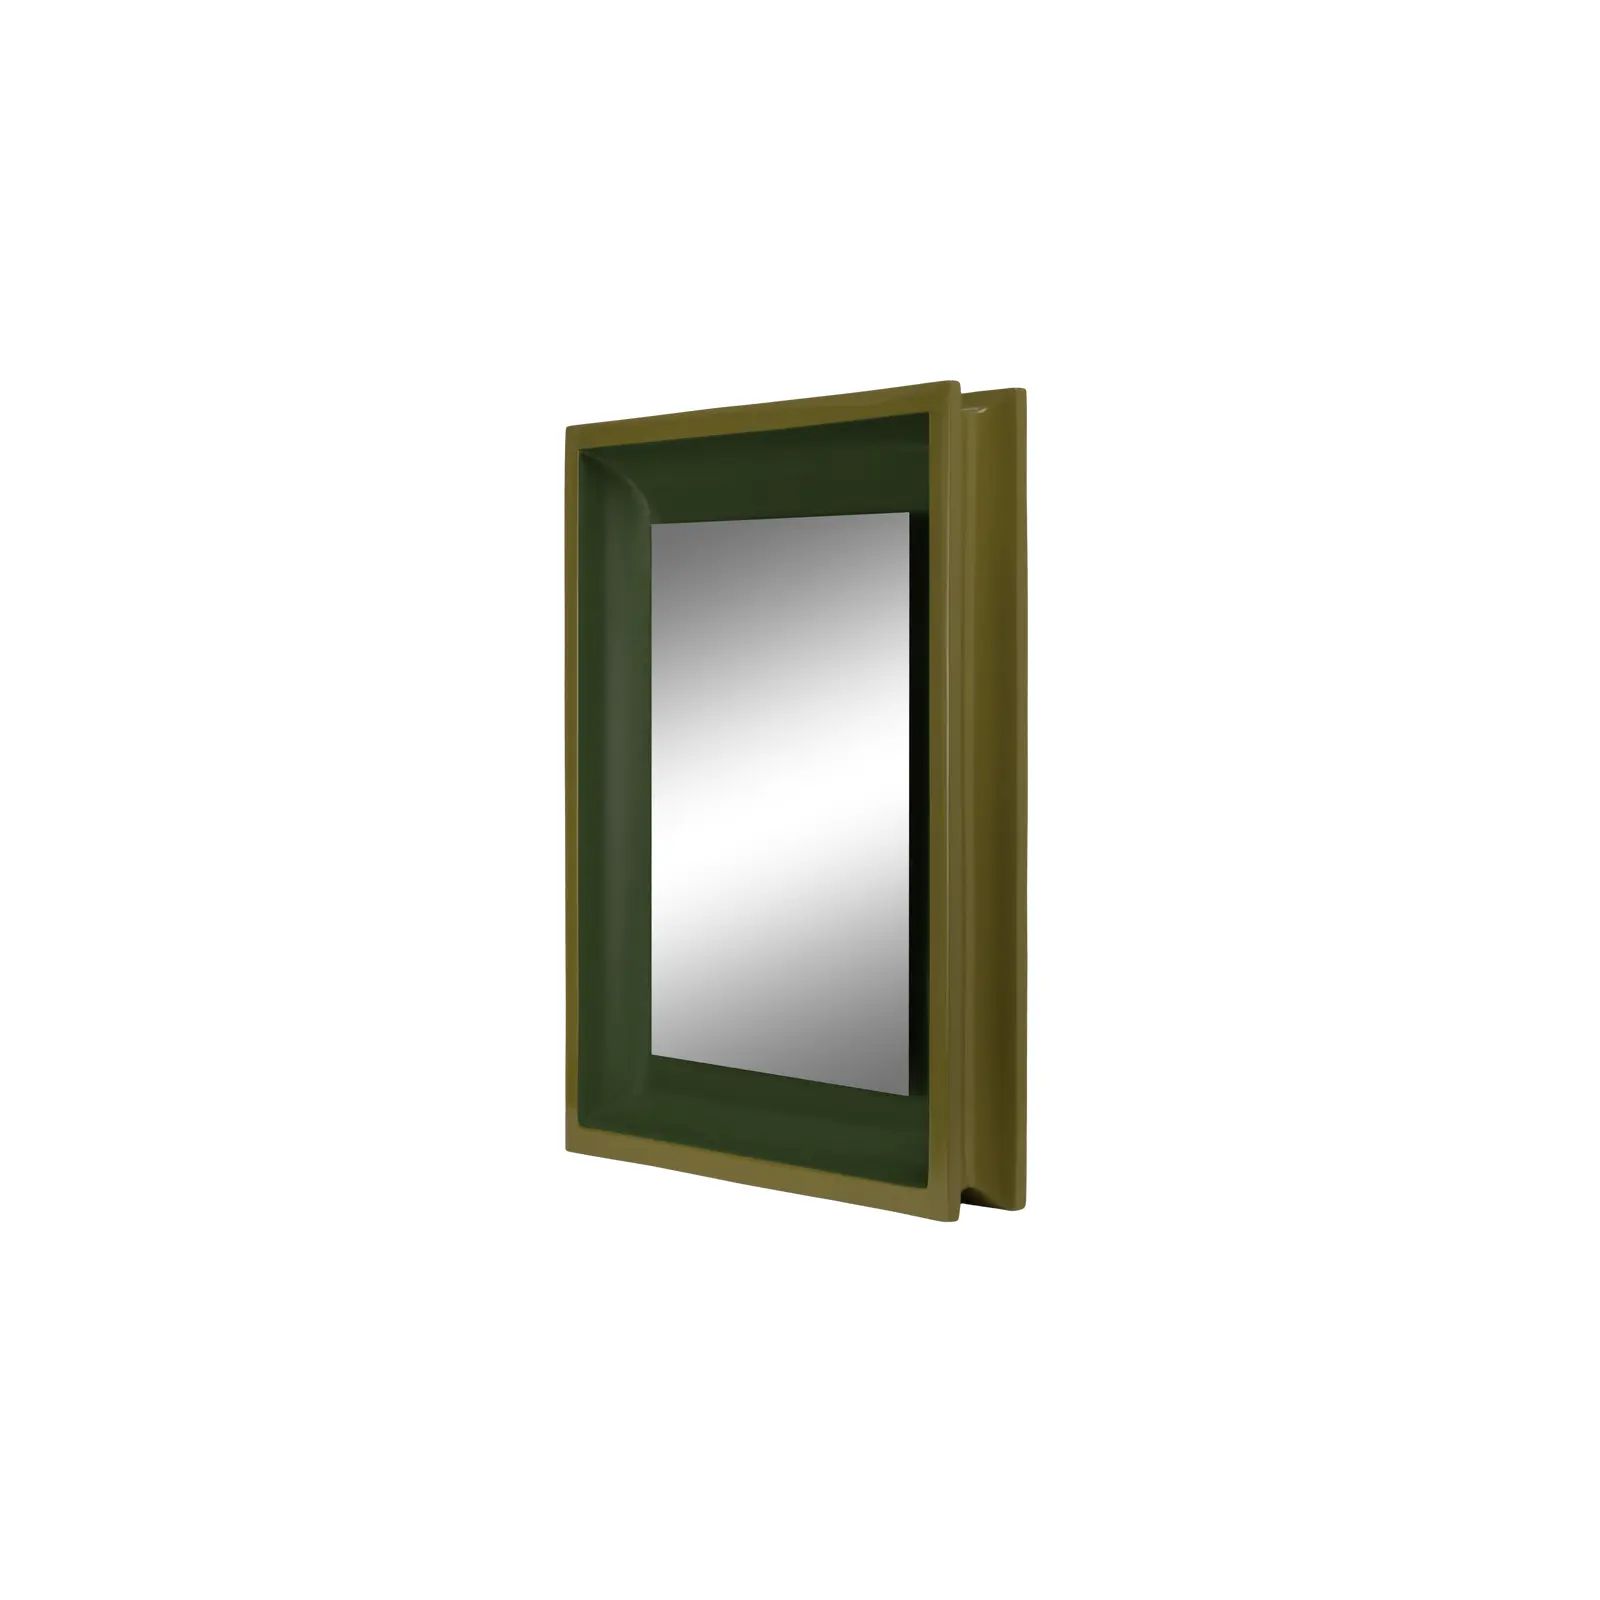 Small Rectangular Floating Mirror in Light Olive / Dark Olive - Jeffrey Bilhuber for The Lacquer ... | Chairish